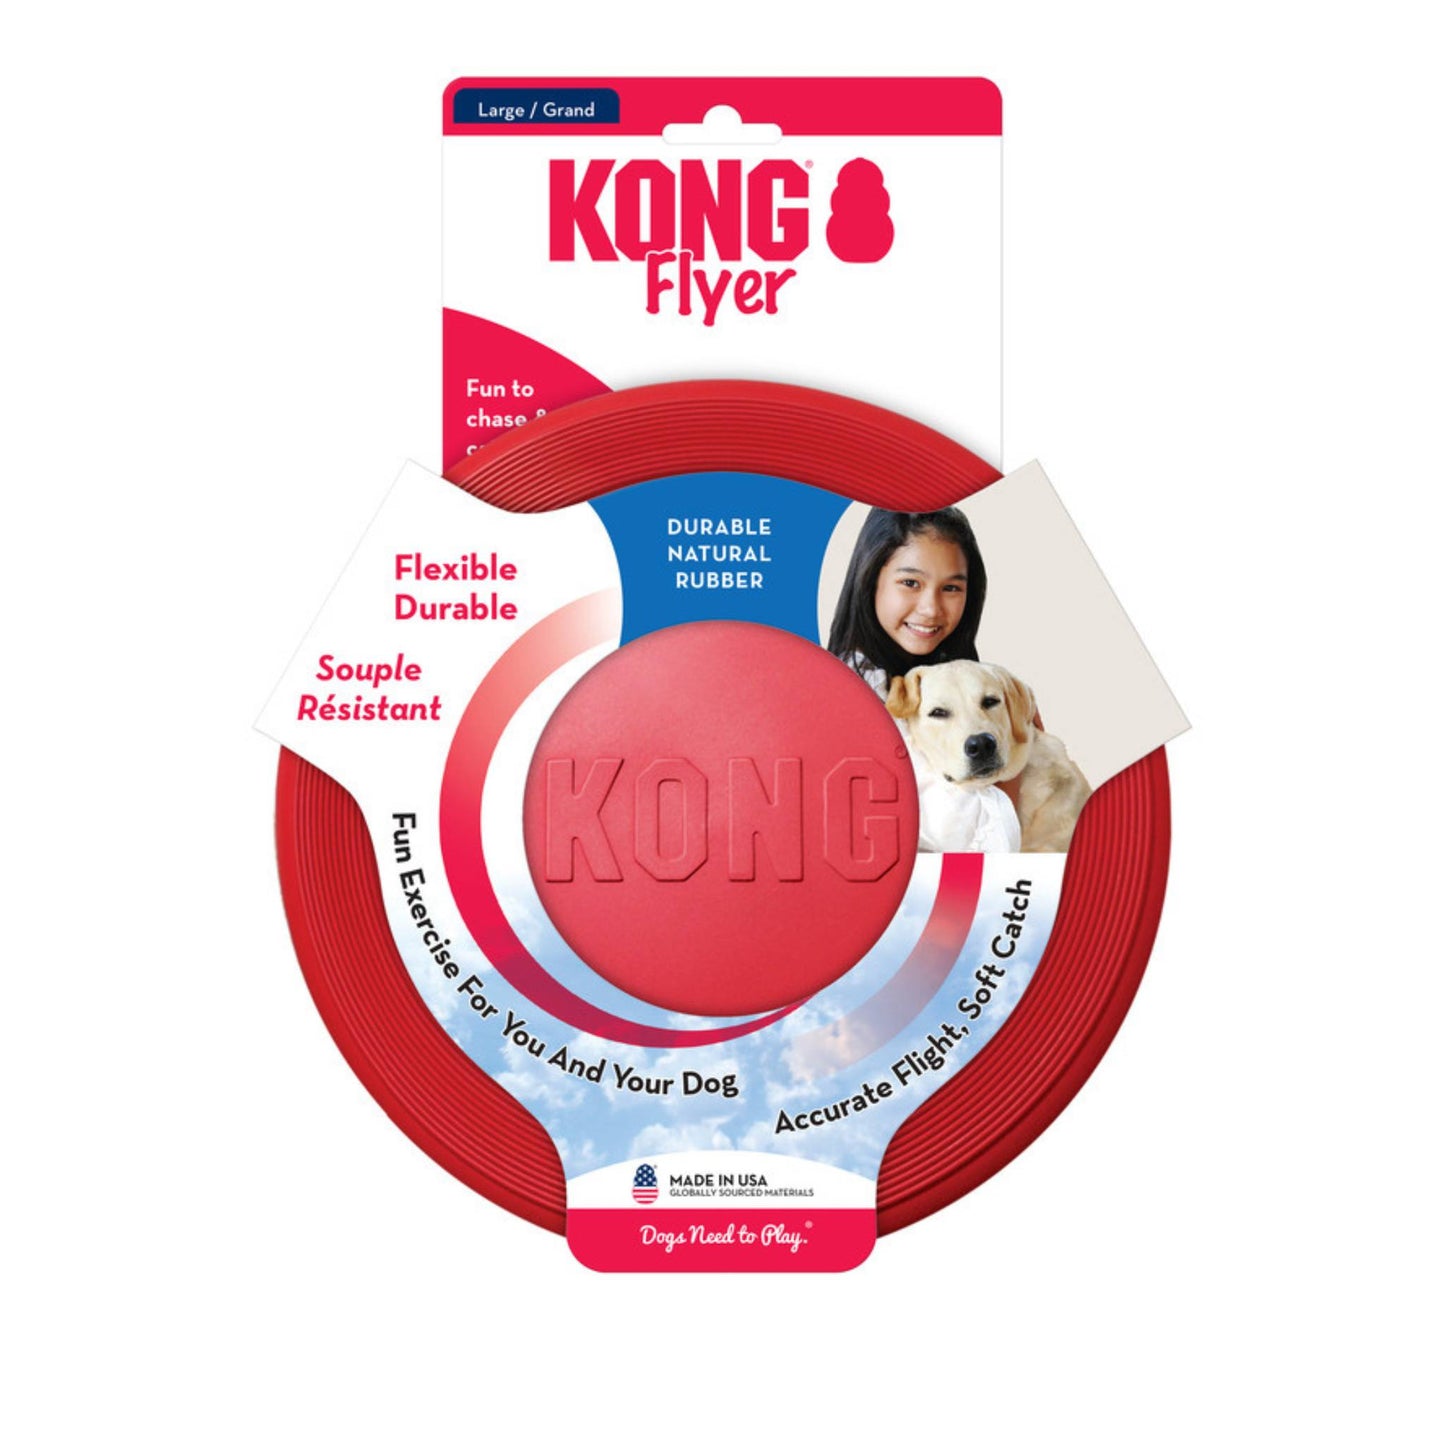 KONG Flyer for dogs